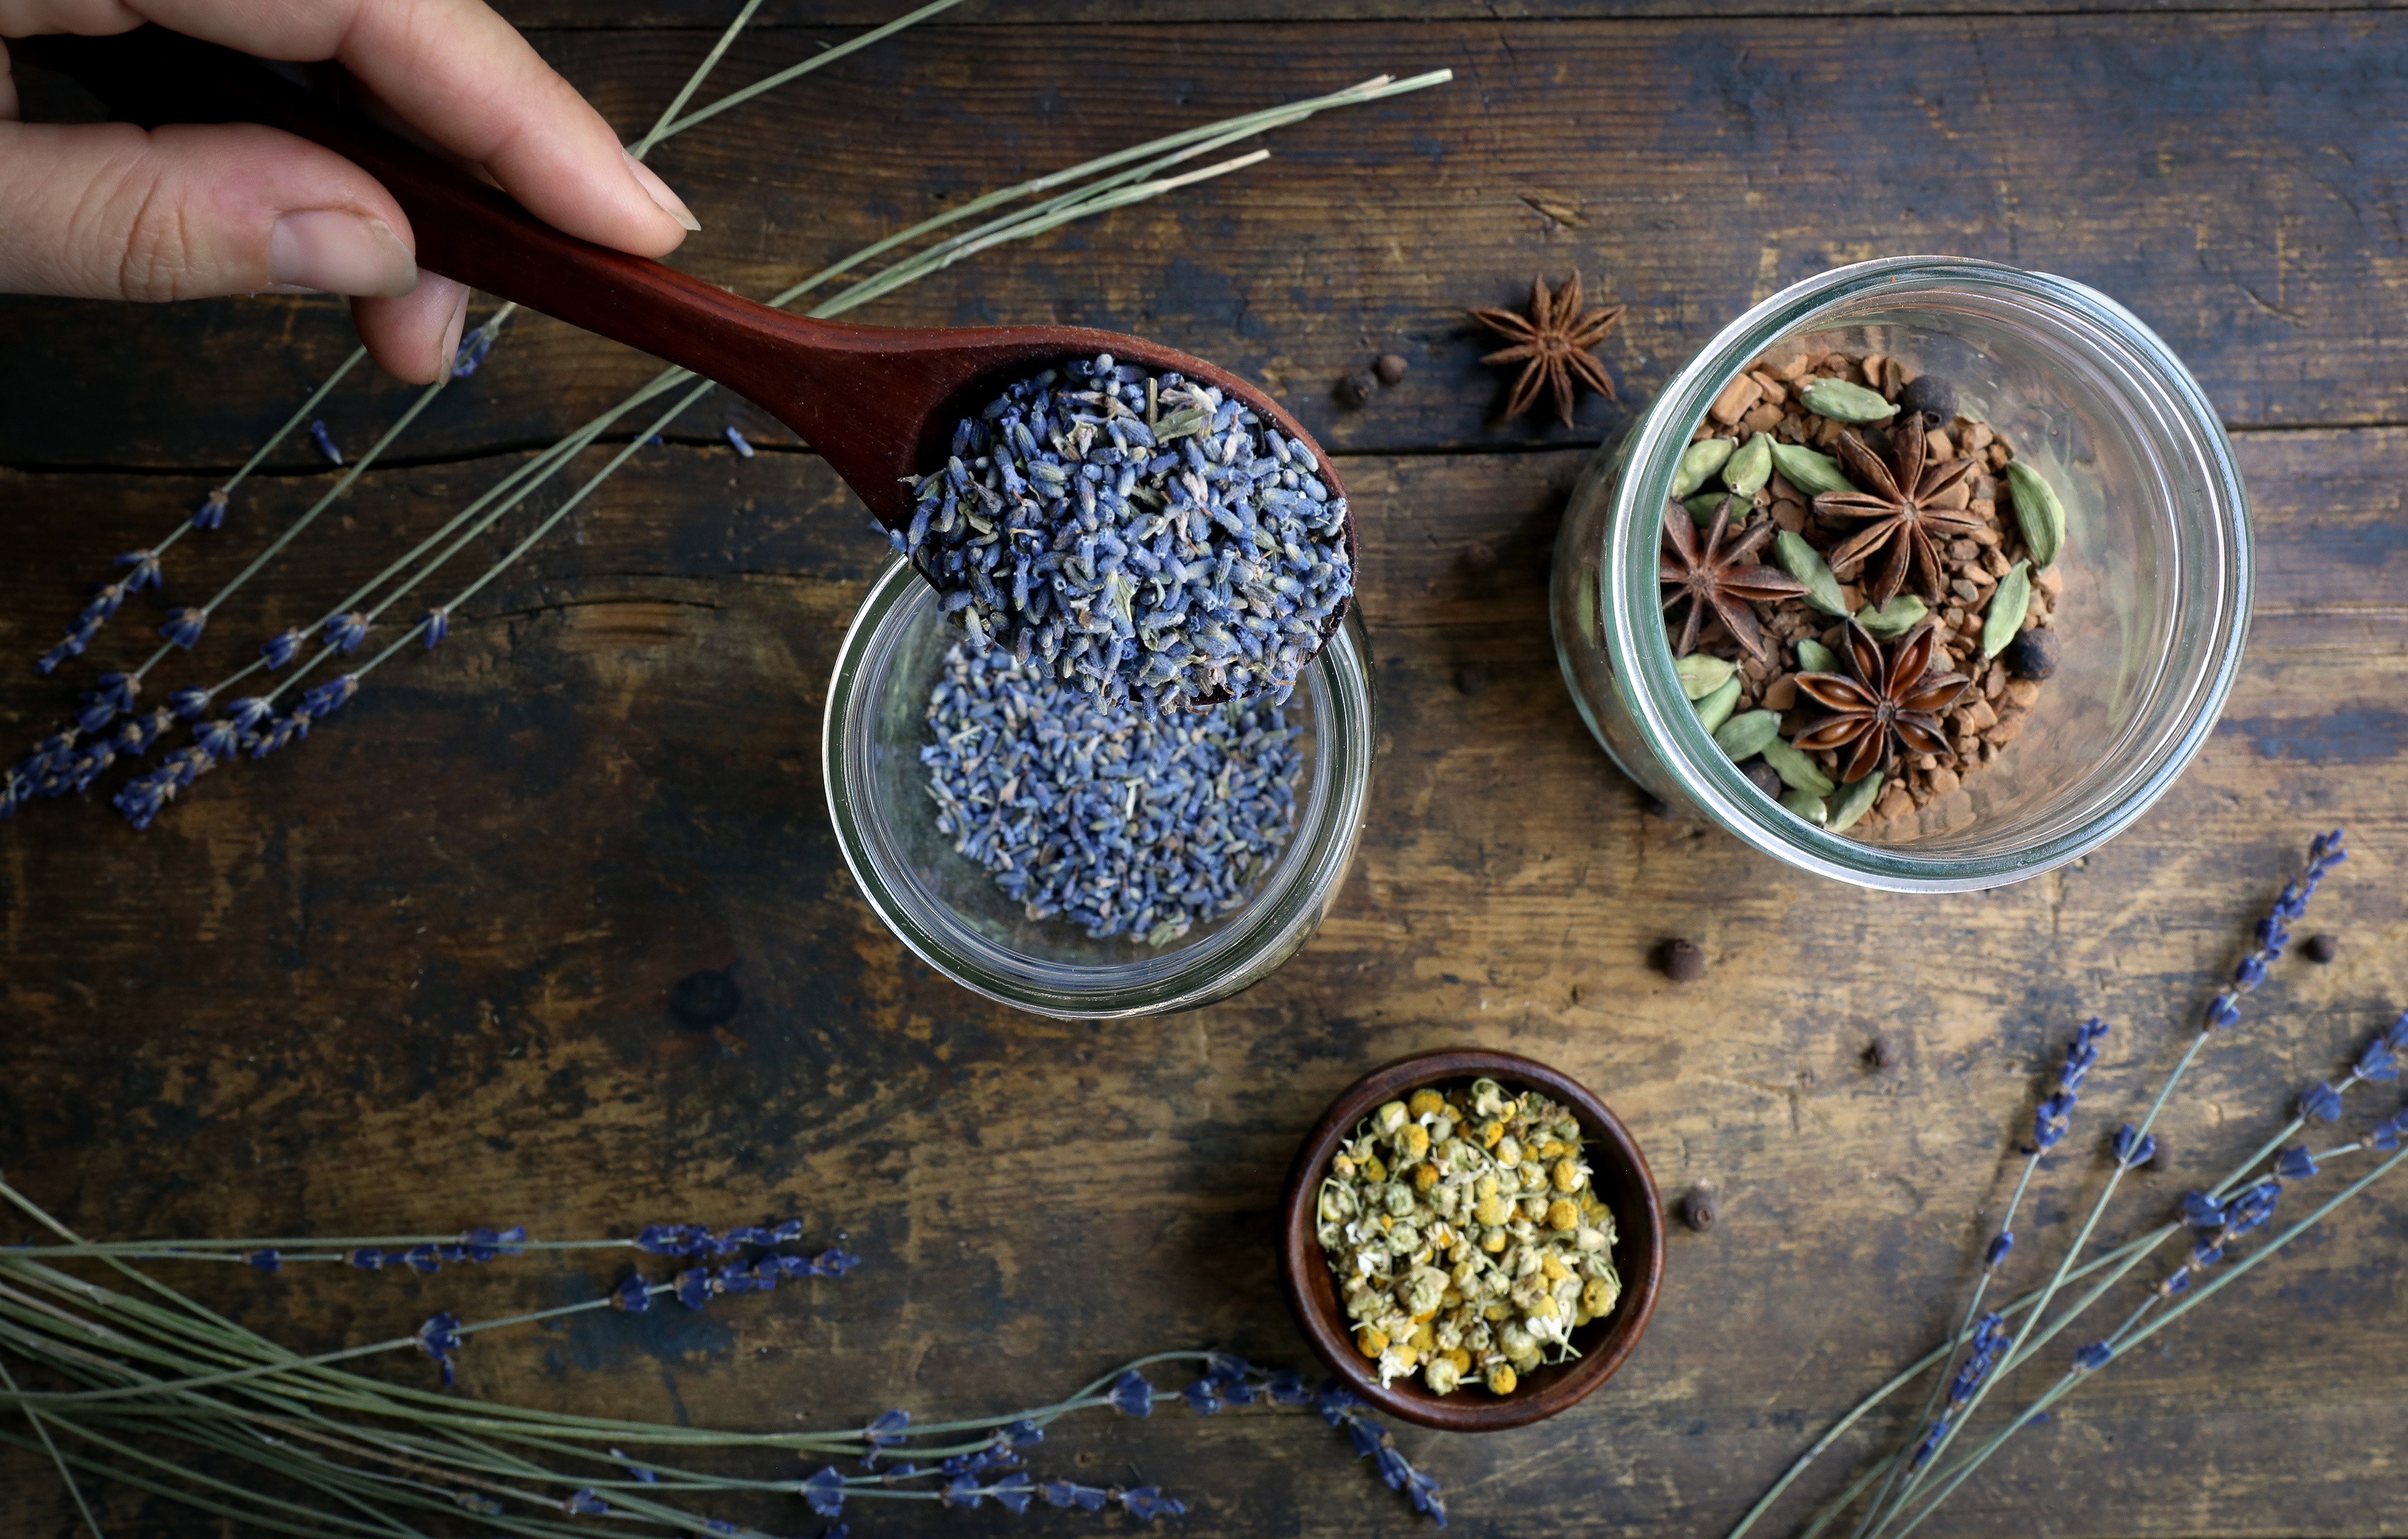 Hand pouring lavender into jar with sprigs of lavender on table and small bowl of chamomile flowers. Another jar with warming spices.